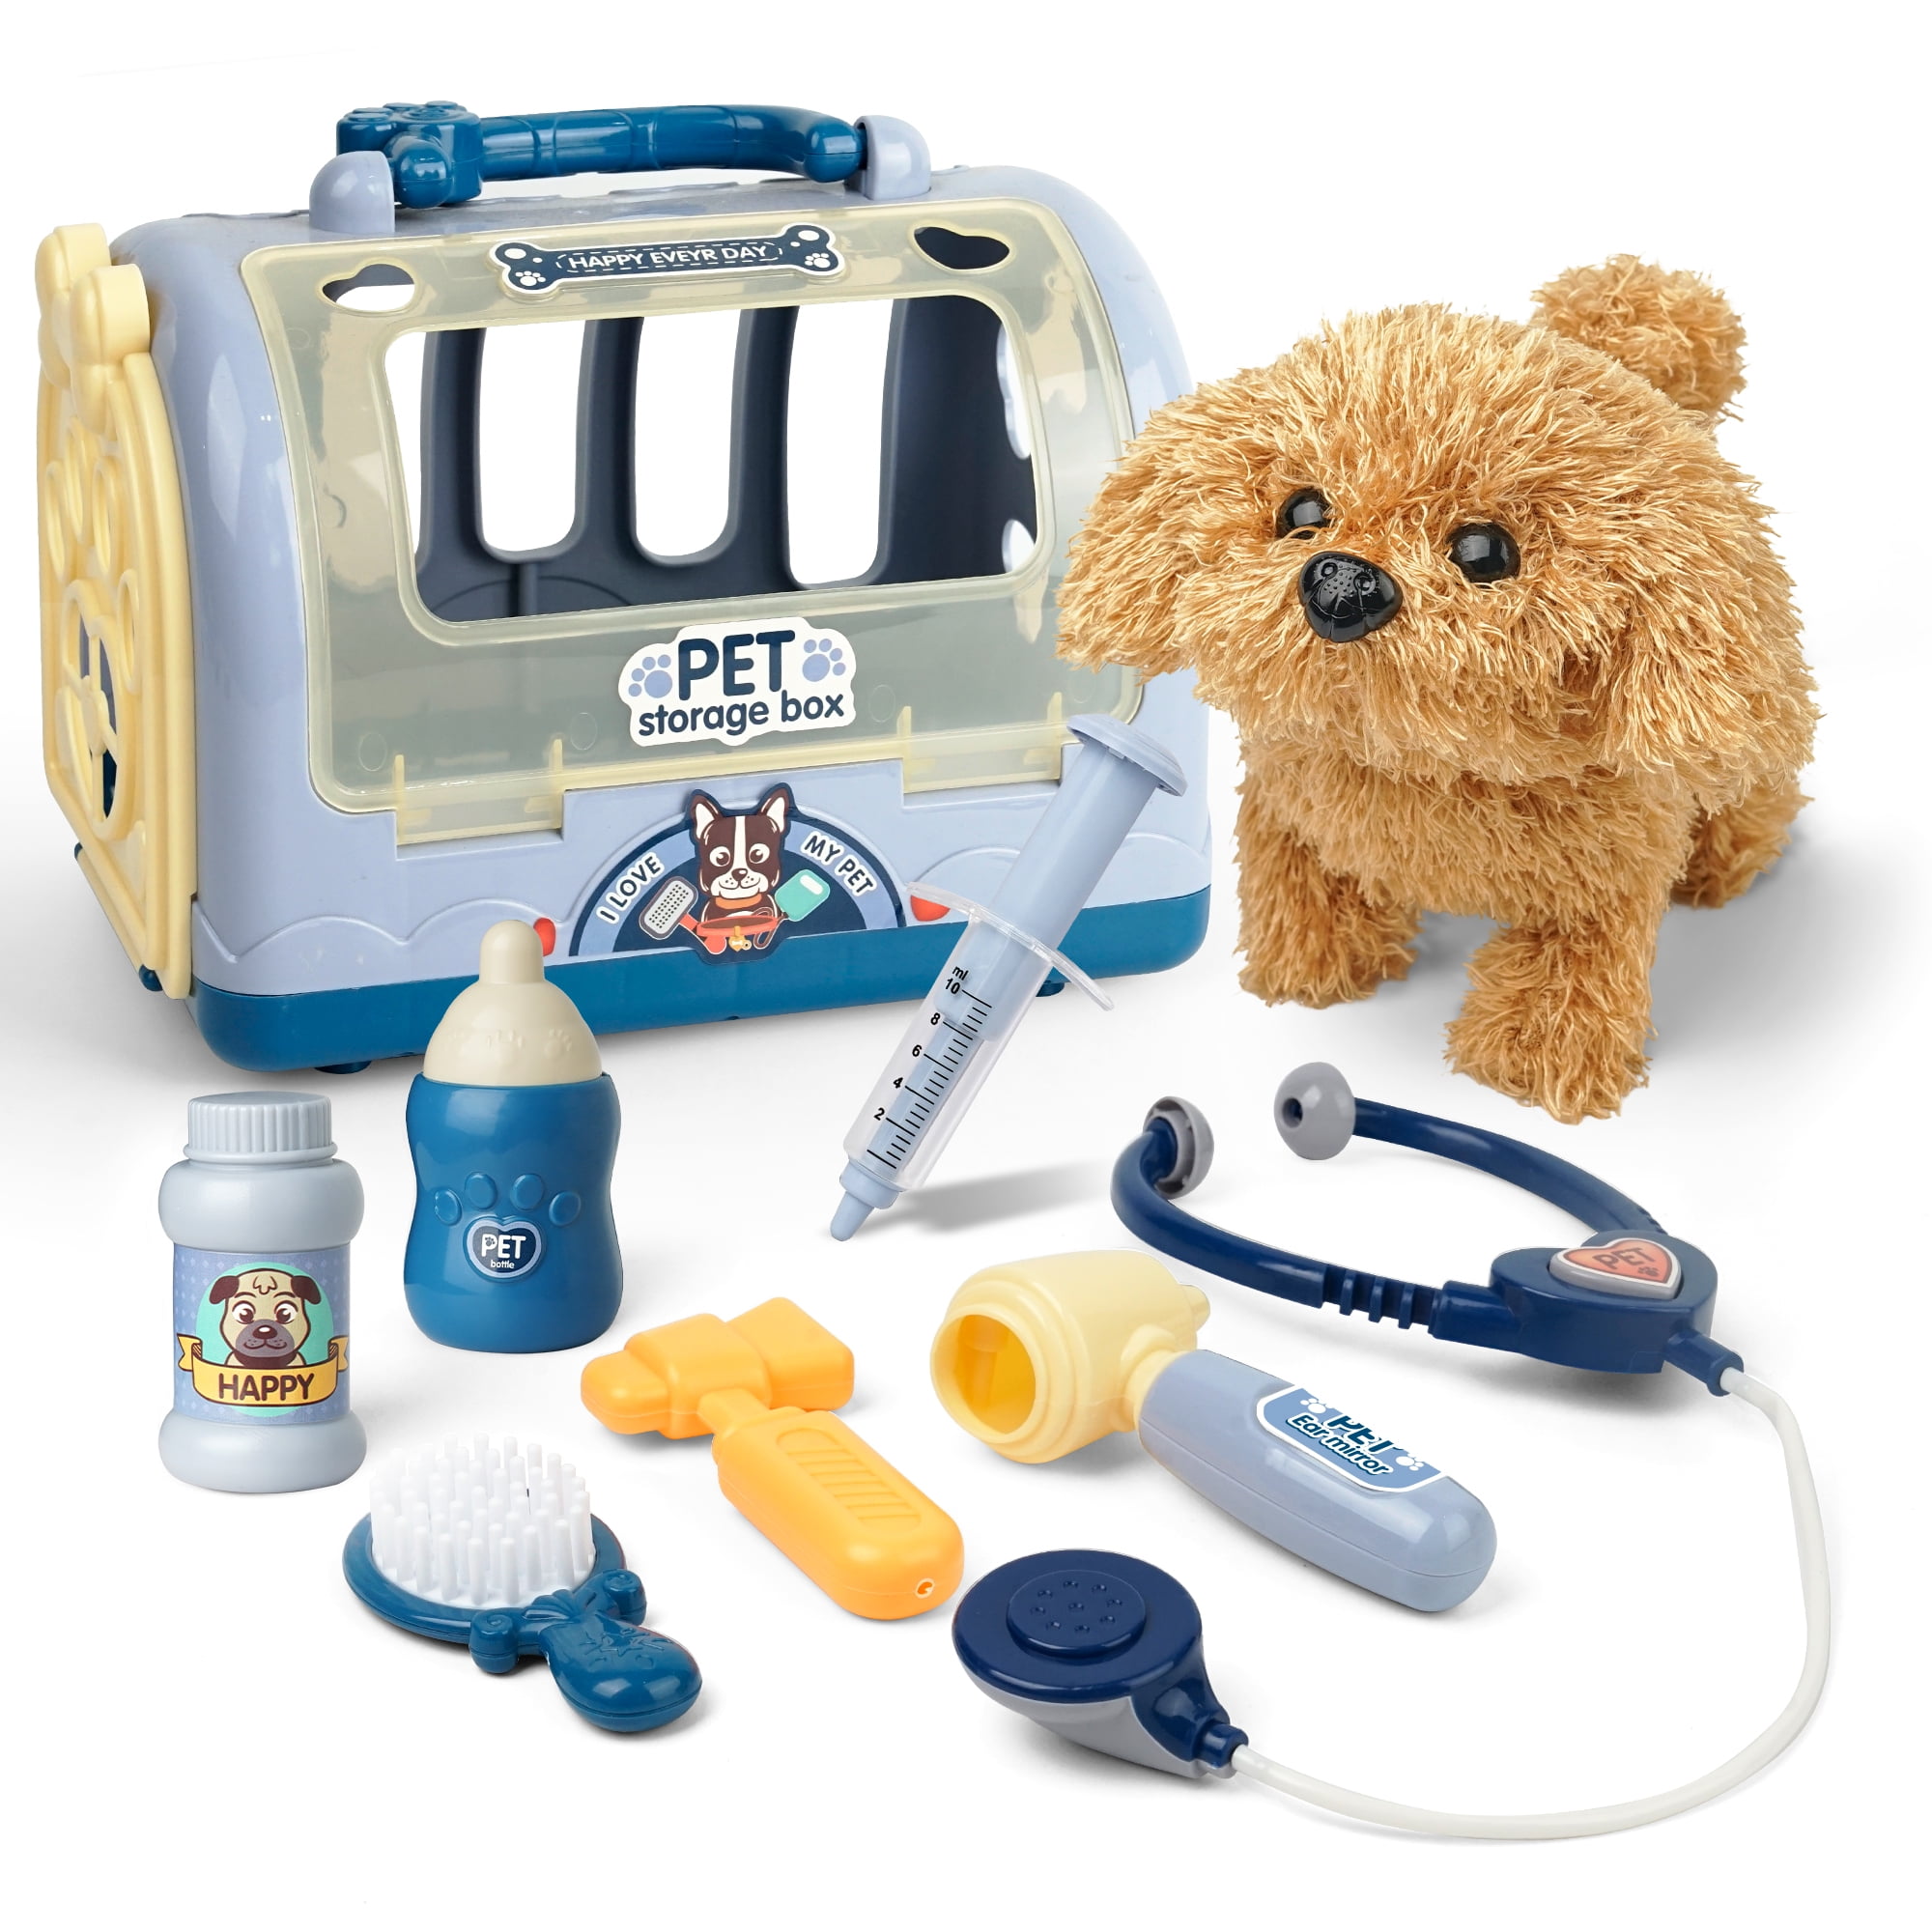 Pet Care Play Set, 18Pcs Doctor Pretend Play Kits For Kids, Puppy